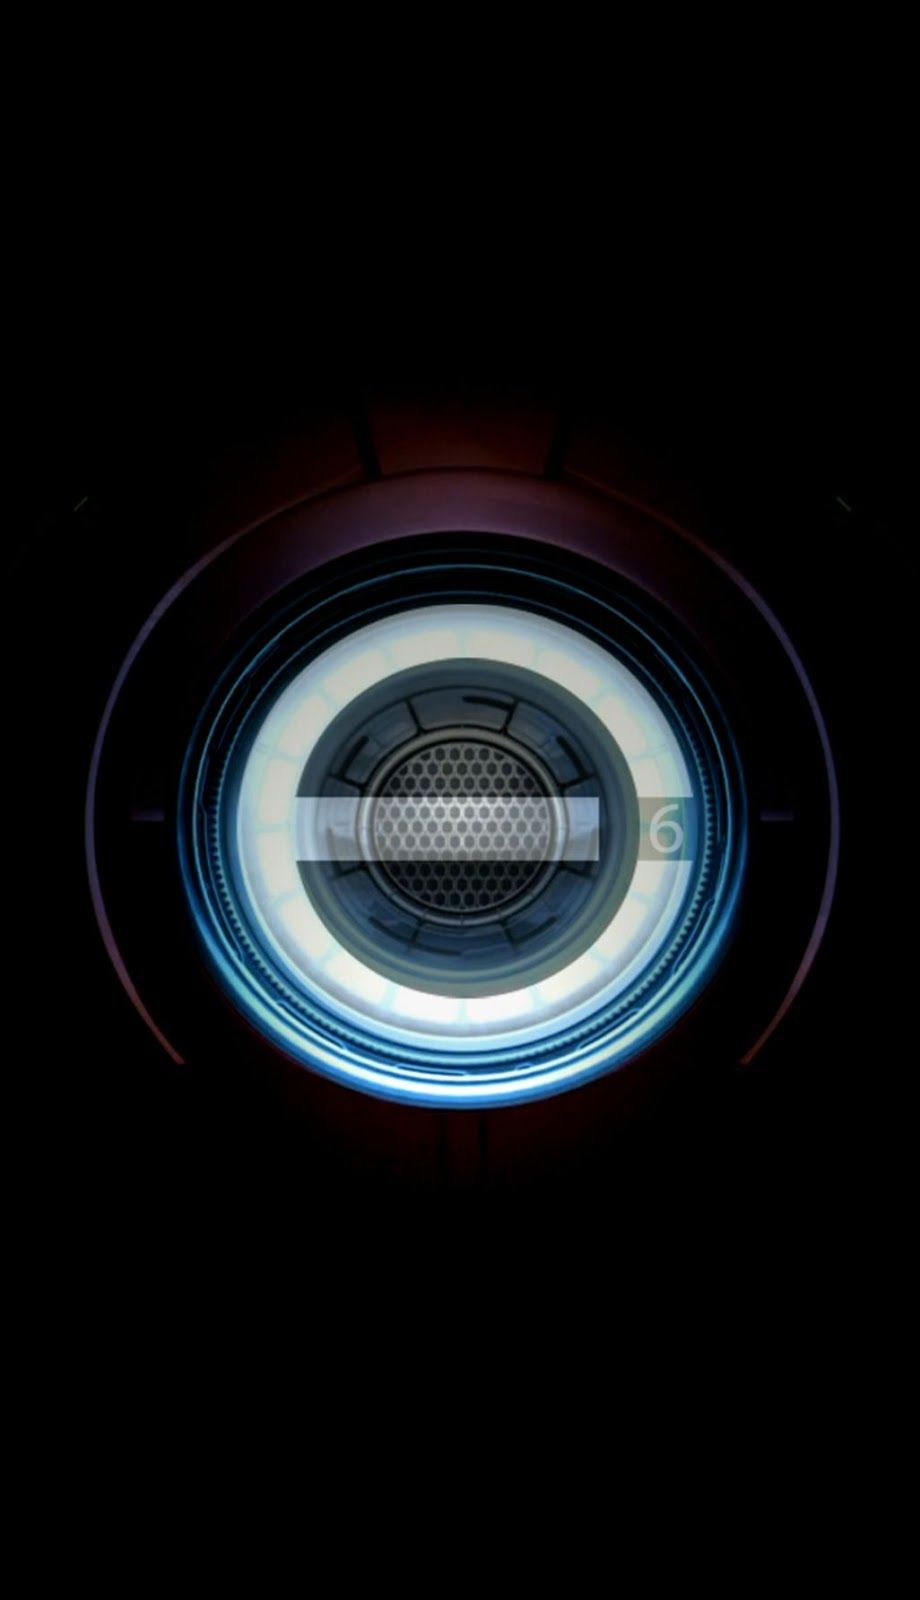 Iron Man Chest Pacemaker Plate iPhone 5 Wallpaper